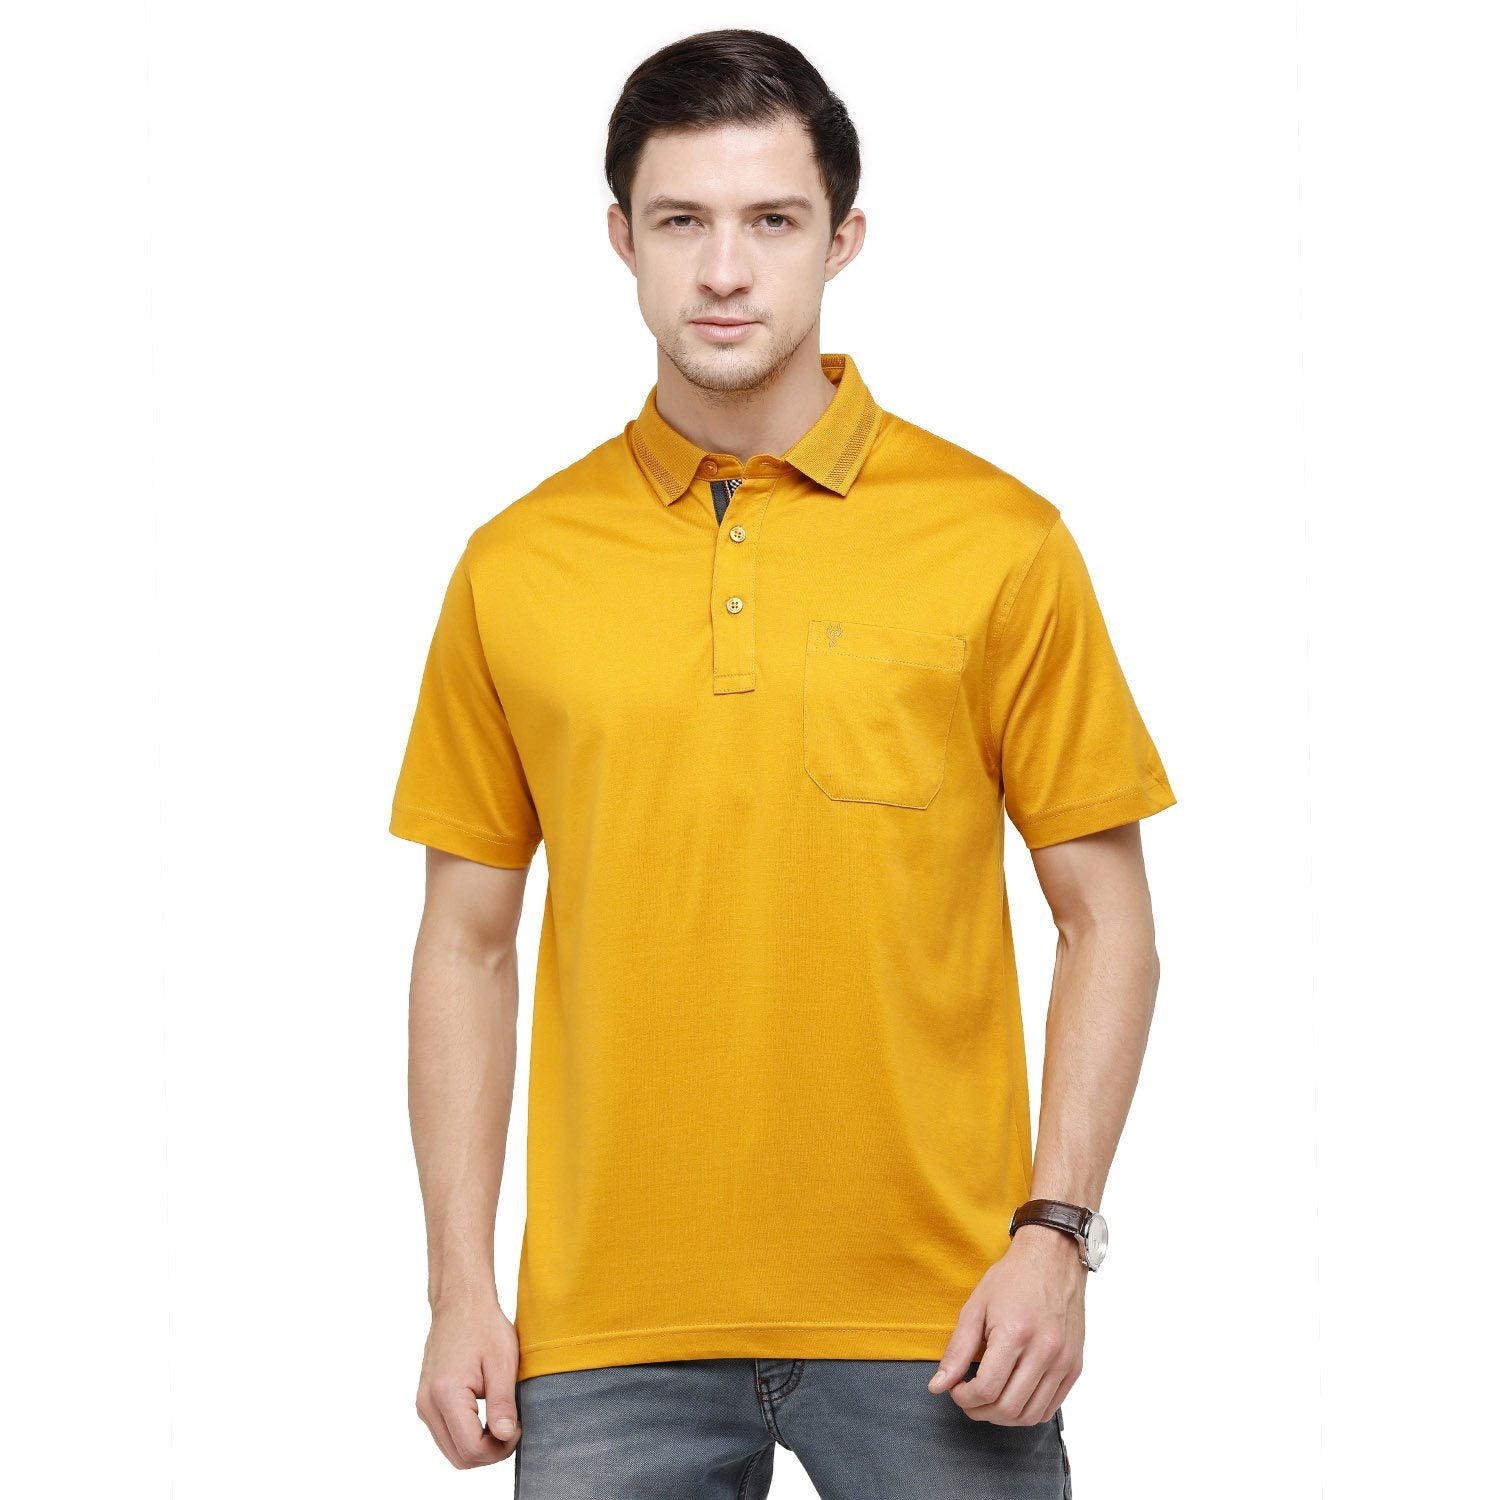 Classic Polo Mens Solid Polo Half Sleeve Authentic Fit 100% Cotton Golden Yellow T-Shirt - SEDOS-GOLDEN YELLOW T-shirt Classic Polo 